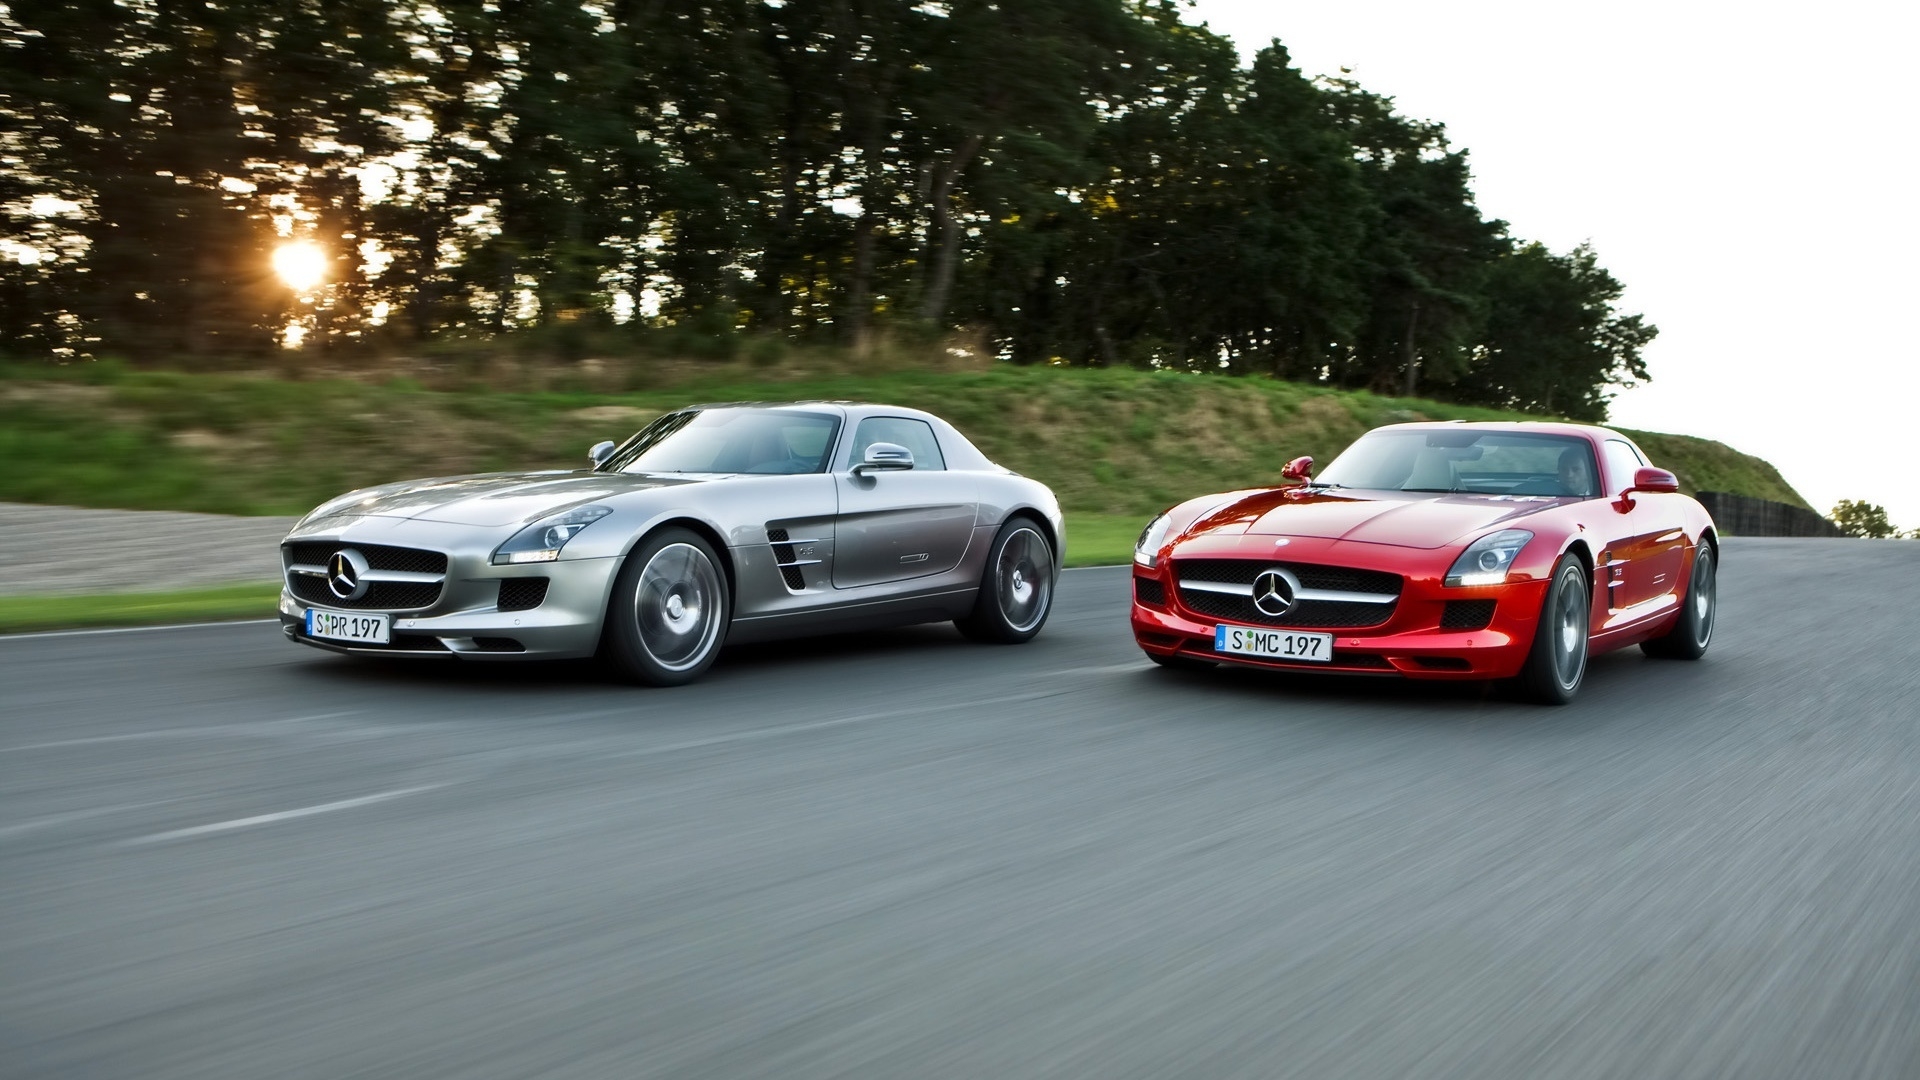 Mercedes Benz SLS AMG Duo 2010 for 1920 x 1080 HDTV 1080p resolution 1920x1080